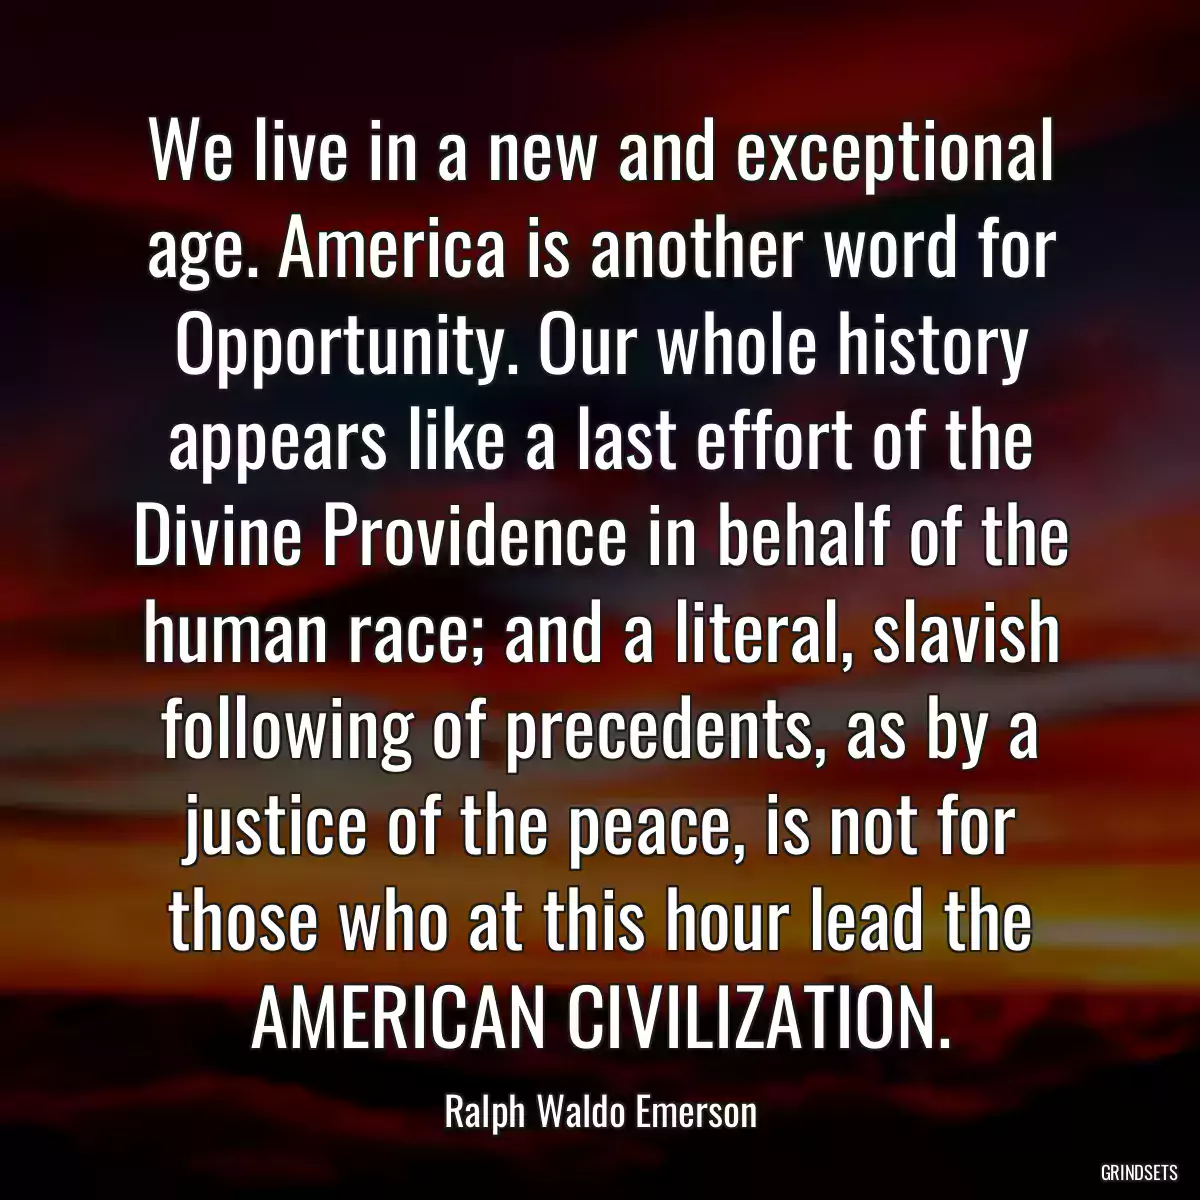 We live in a new and exceptional age. America is another word for Opportunity. Our whole history appears like a last effort of the Divine Providence in behalf of the human race; and a literal, slavish following of precedents, as by a justice of the peace, is not for those who at this hour lead the AMERICAN CIVILIZATION.